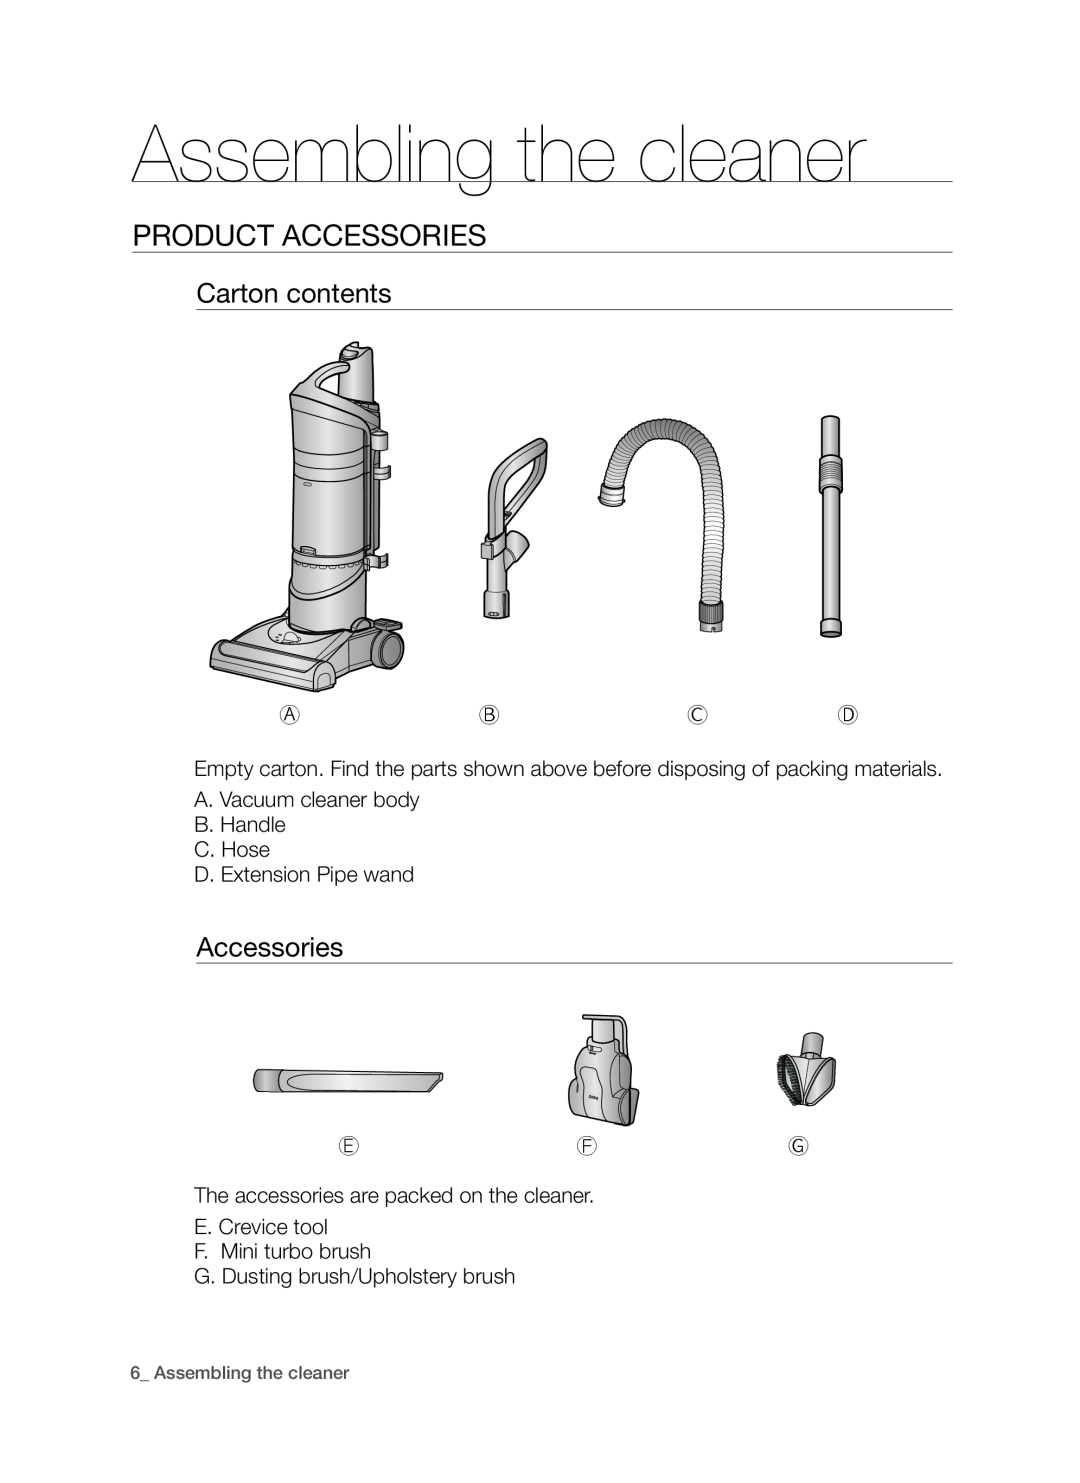 Samsung SU9380, DJ68-00264B user manual Accessories, Assembling the cleaner, Product accessories, Carton contents 